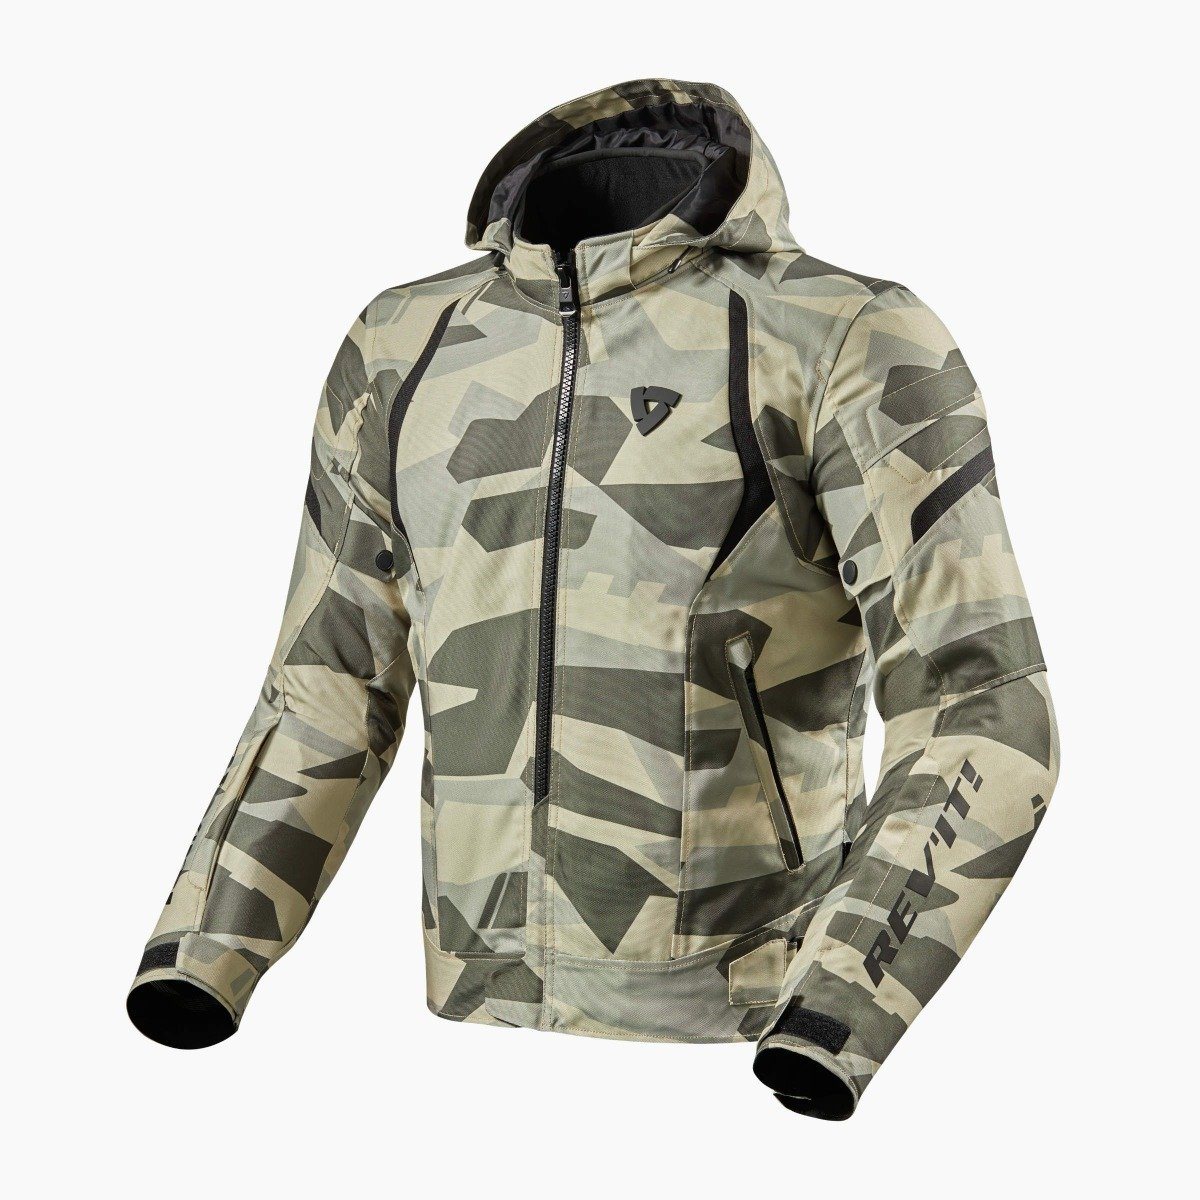 Image of REV'IT! Flare 2 Jacket Camo Light Green Size L ID 8700001296472